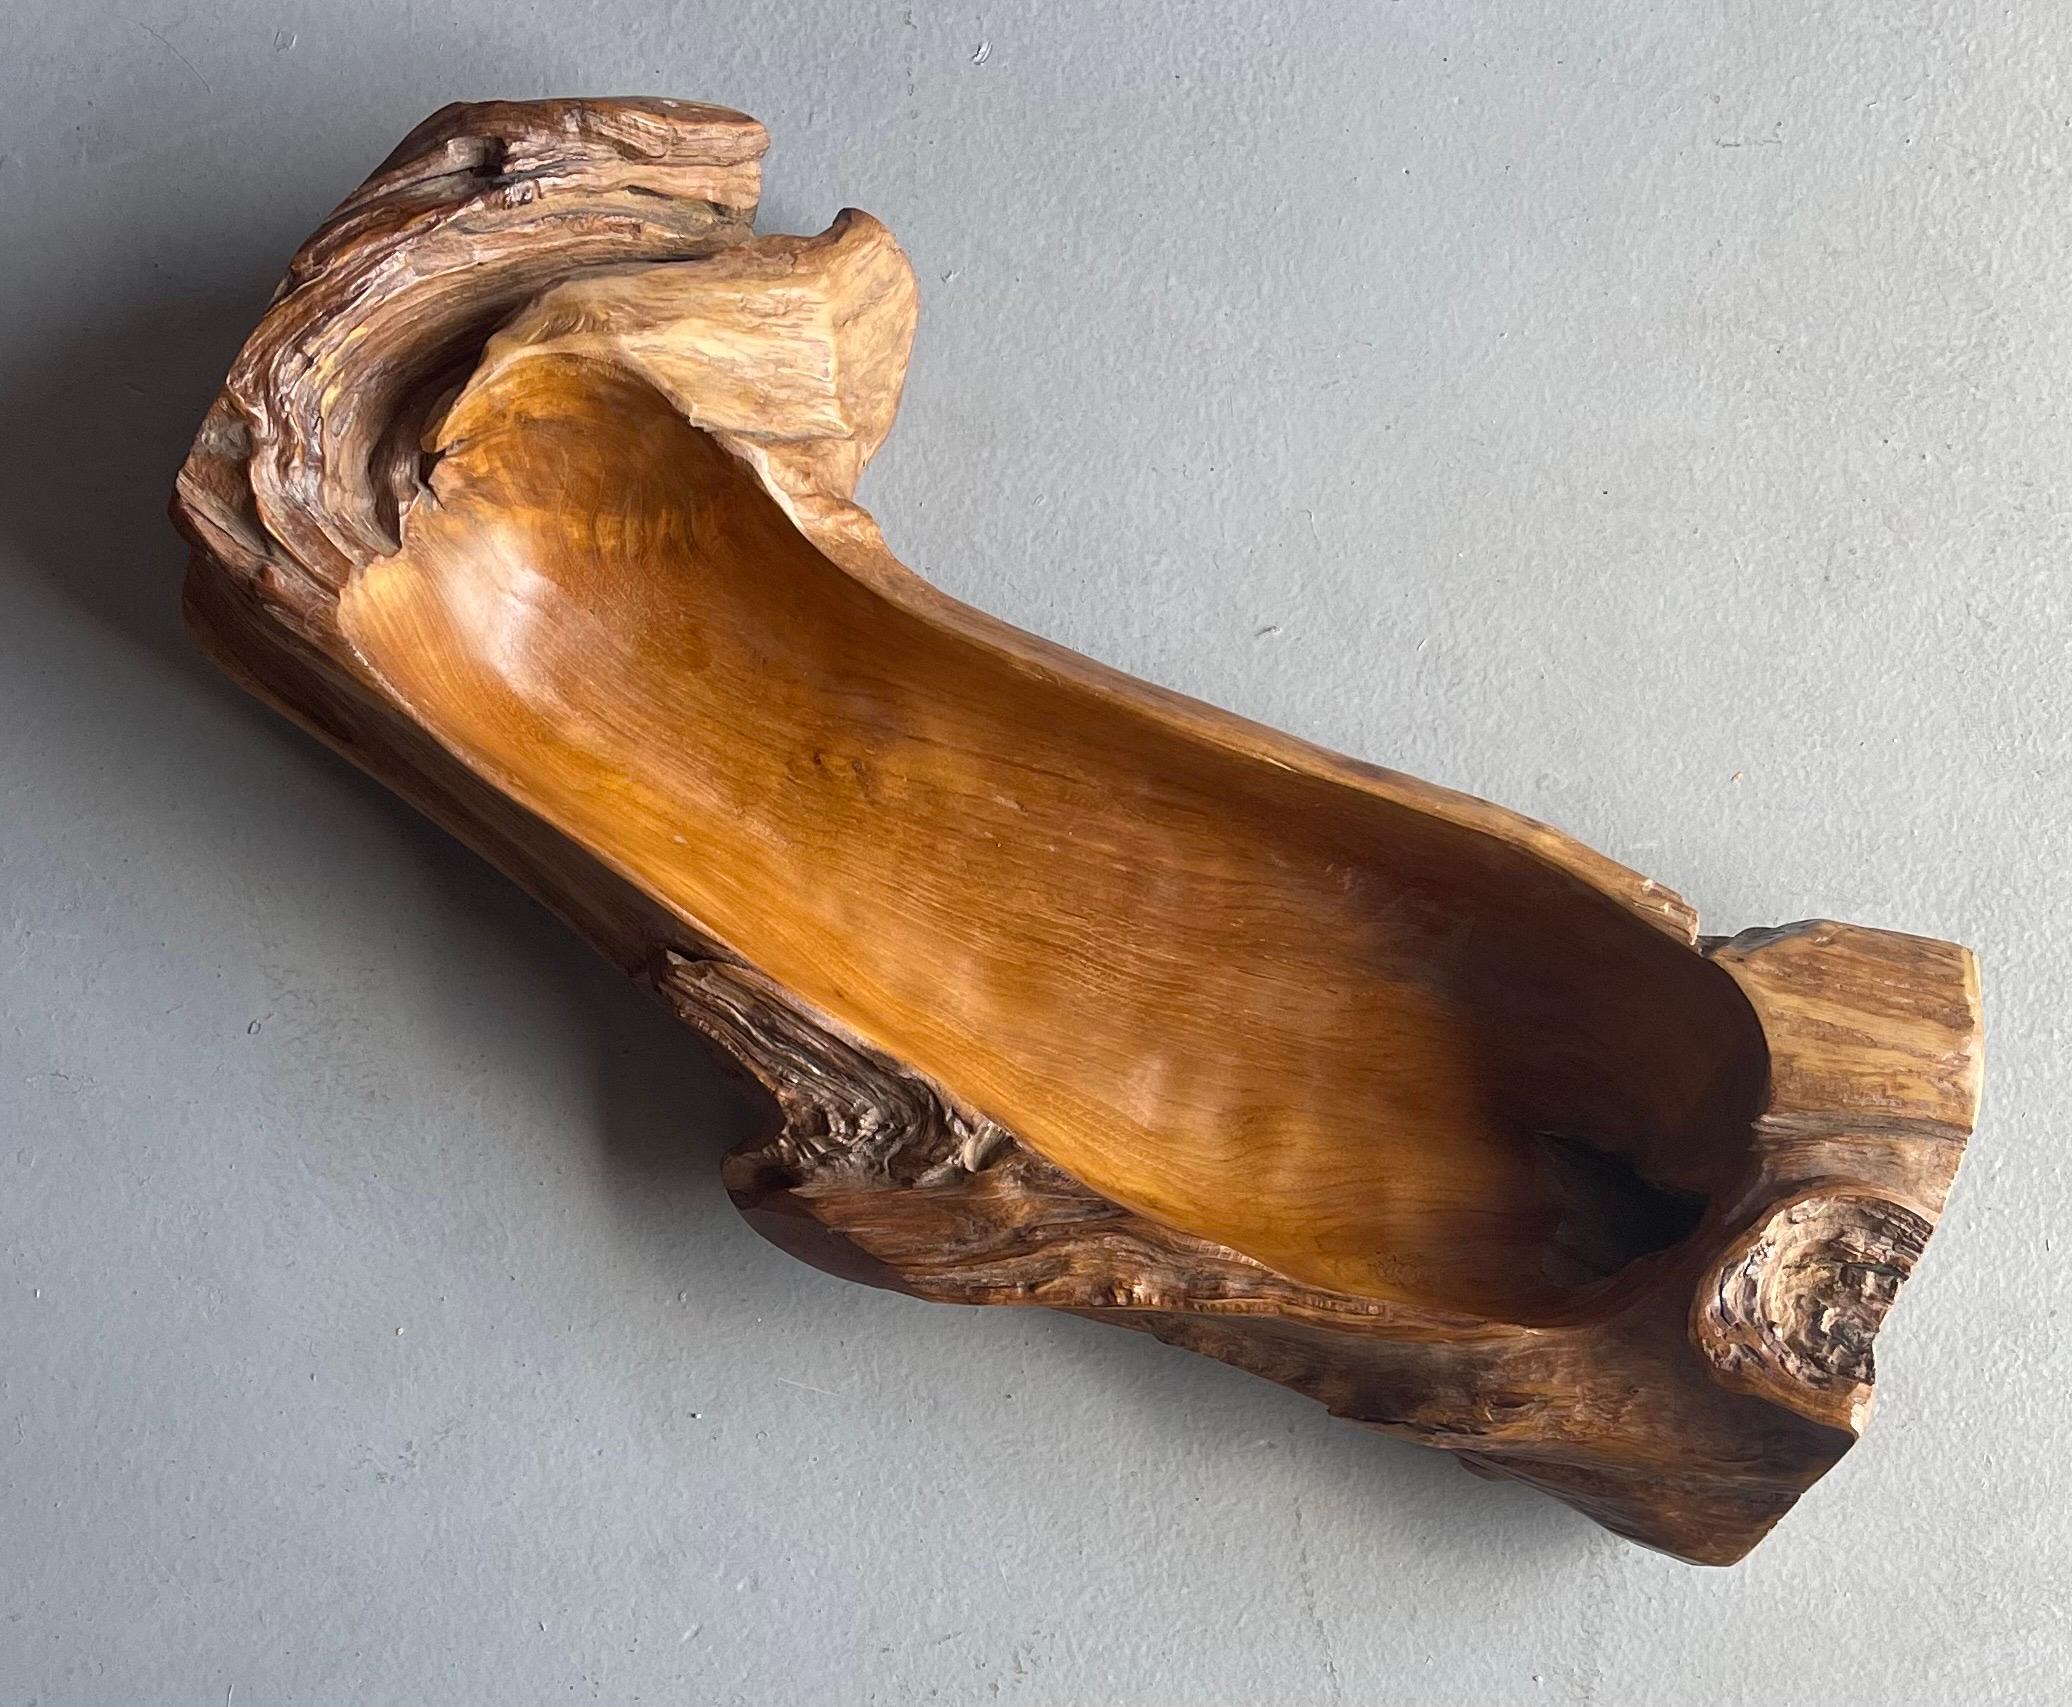 A gorgeous large natural teak freeform bowl, circa 1960s. The bowl has a great organic modern look and measures 24